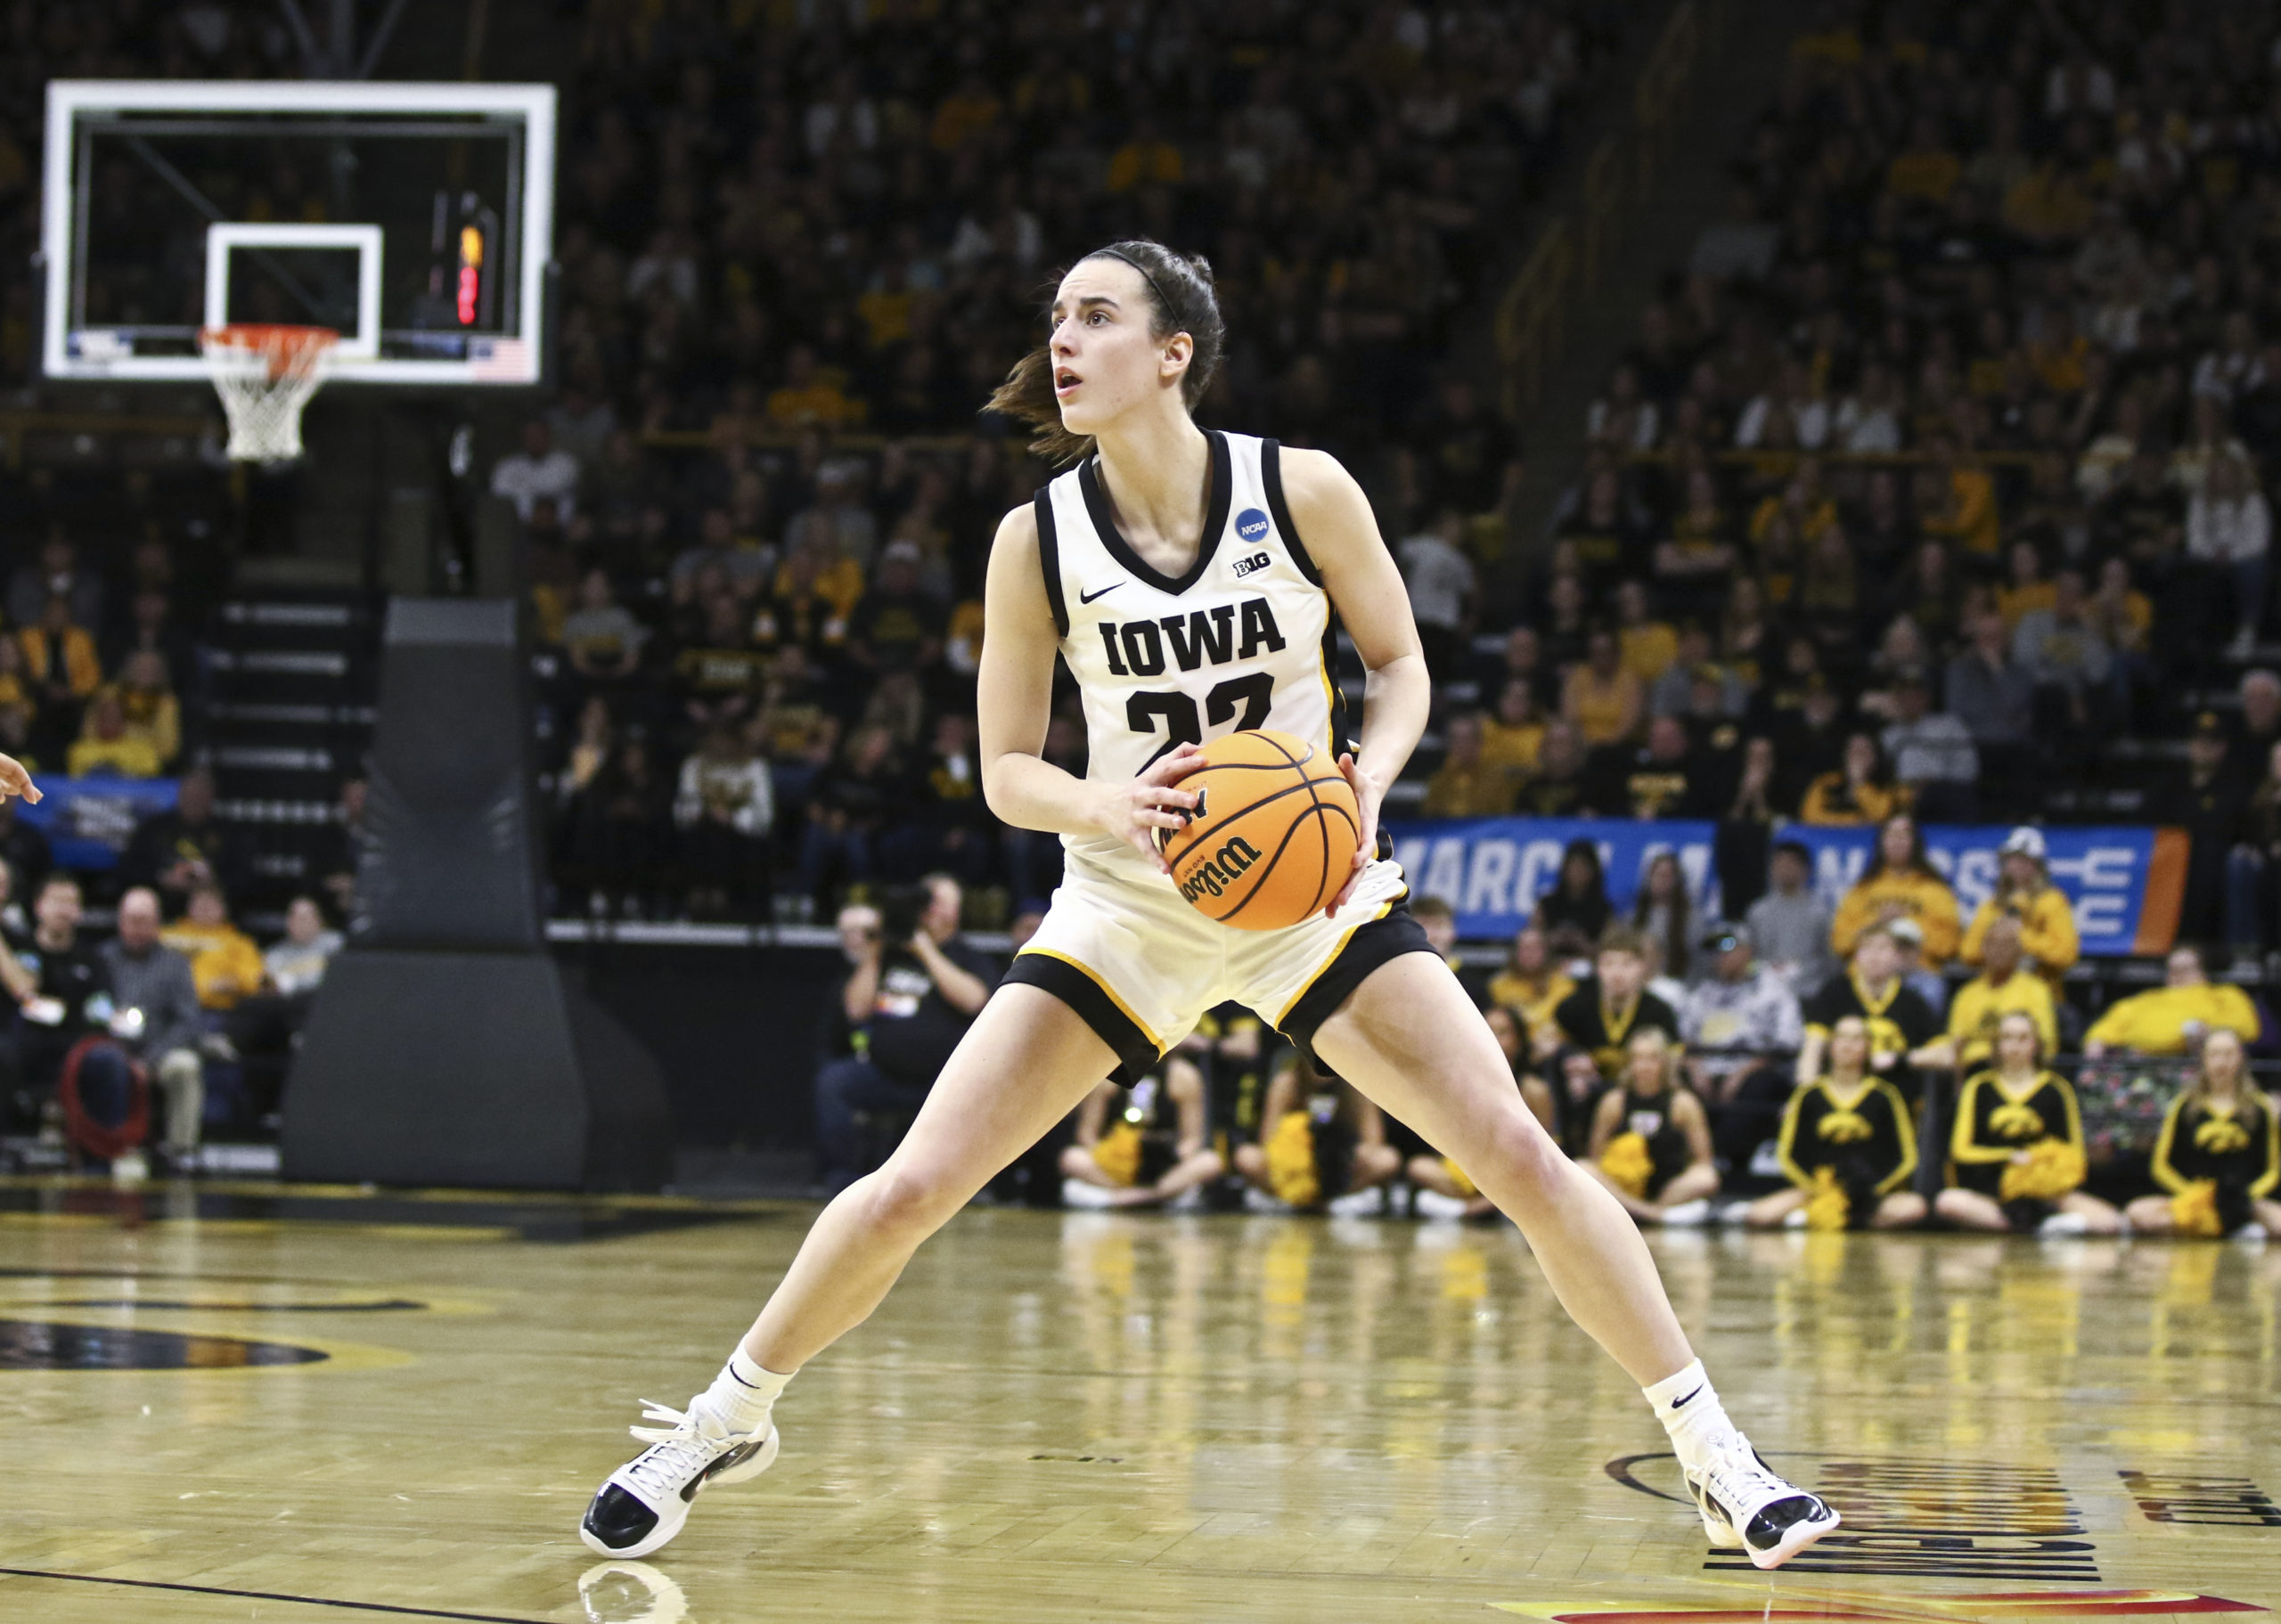 IOWA CITY, IOWA- MARCH 23: Guard Caitlin Clark #22 of the Iowa Hawkeyes leaps into 3-point range for a shot in the first half against the Holy Cross Crusaders during their match-up in the 2024 NCAA Division 1 Womens Basketball Championship at Carver-Hawkeye Arena on March 23, 2024 in Iowa City, Iowa. Matthew Holst/Getty Images